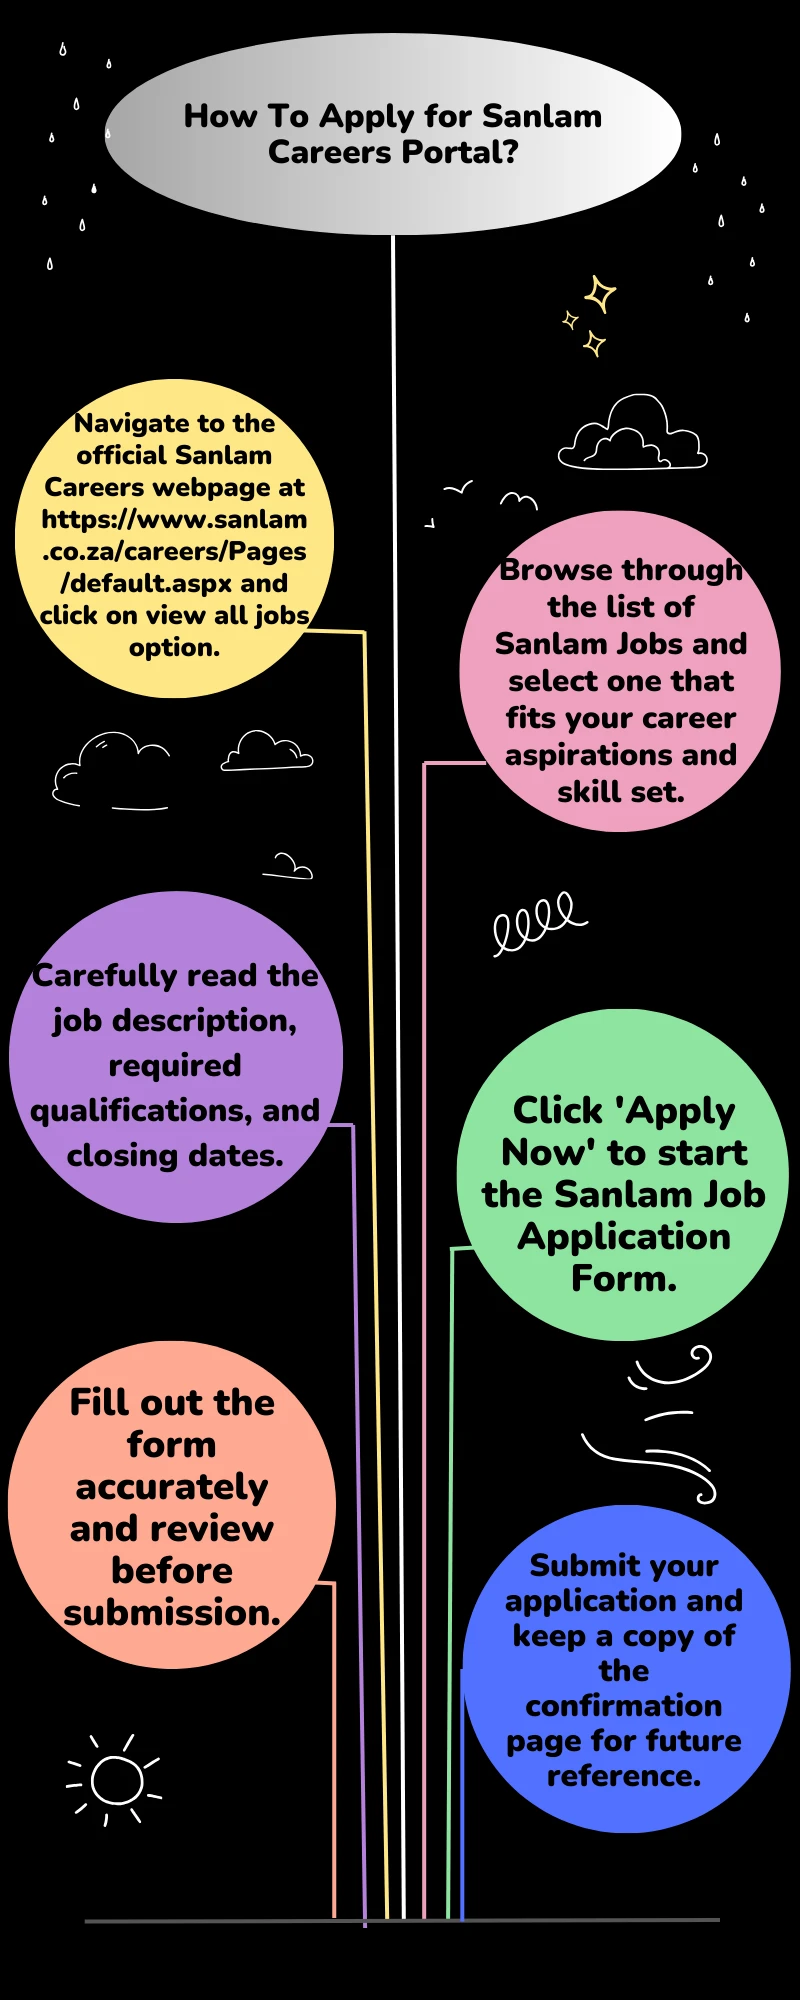 How To Apply for Sanlam Careers Portal?